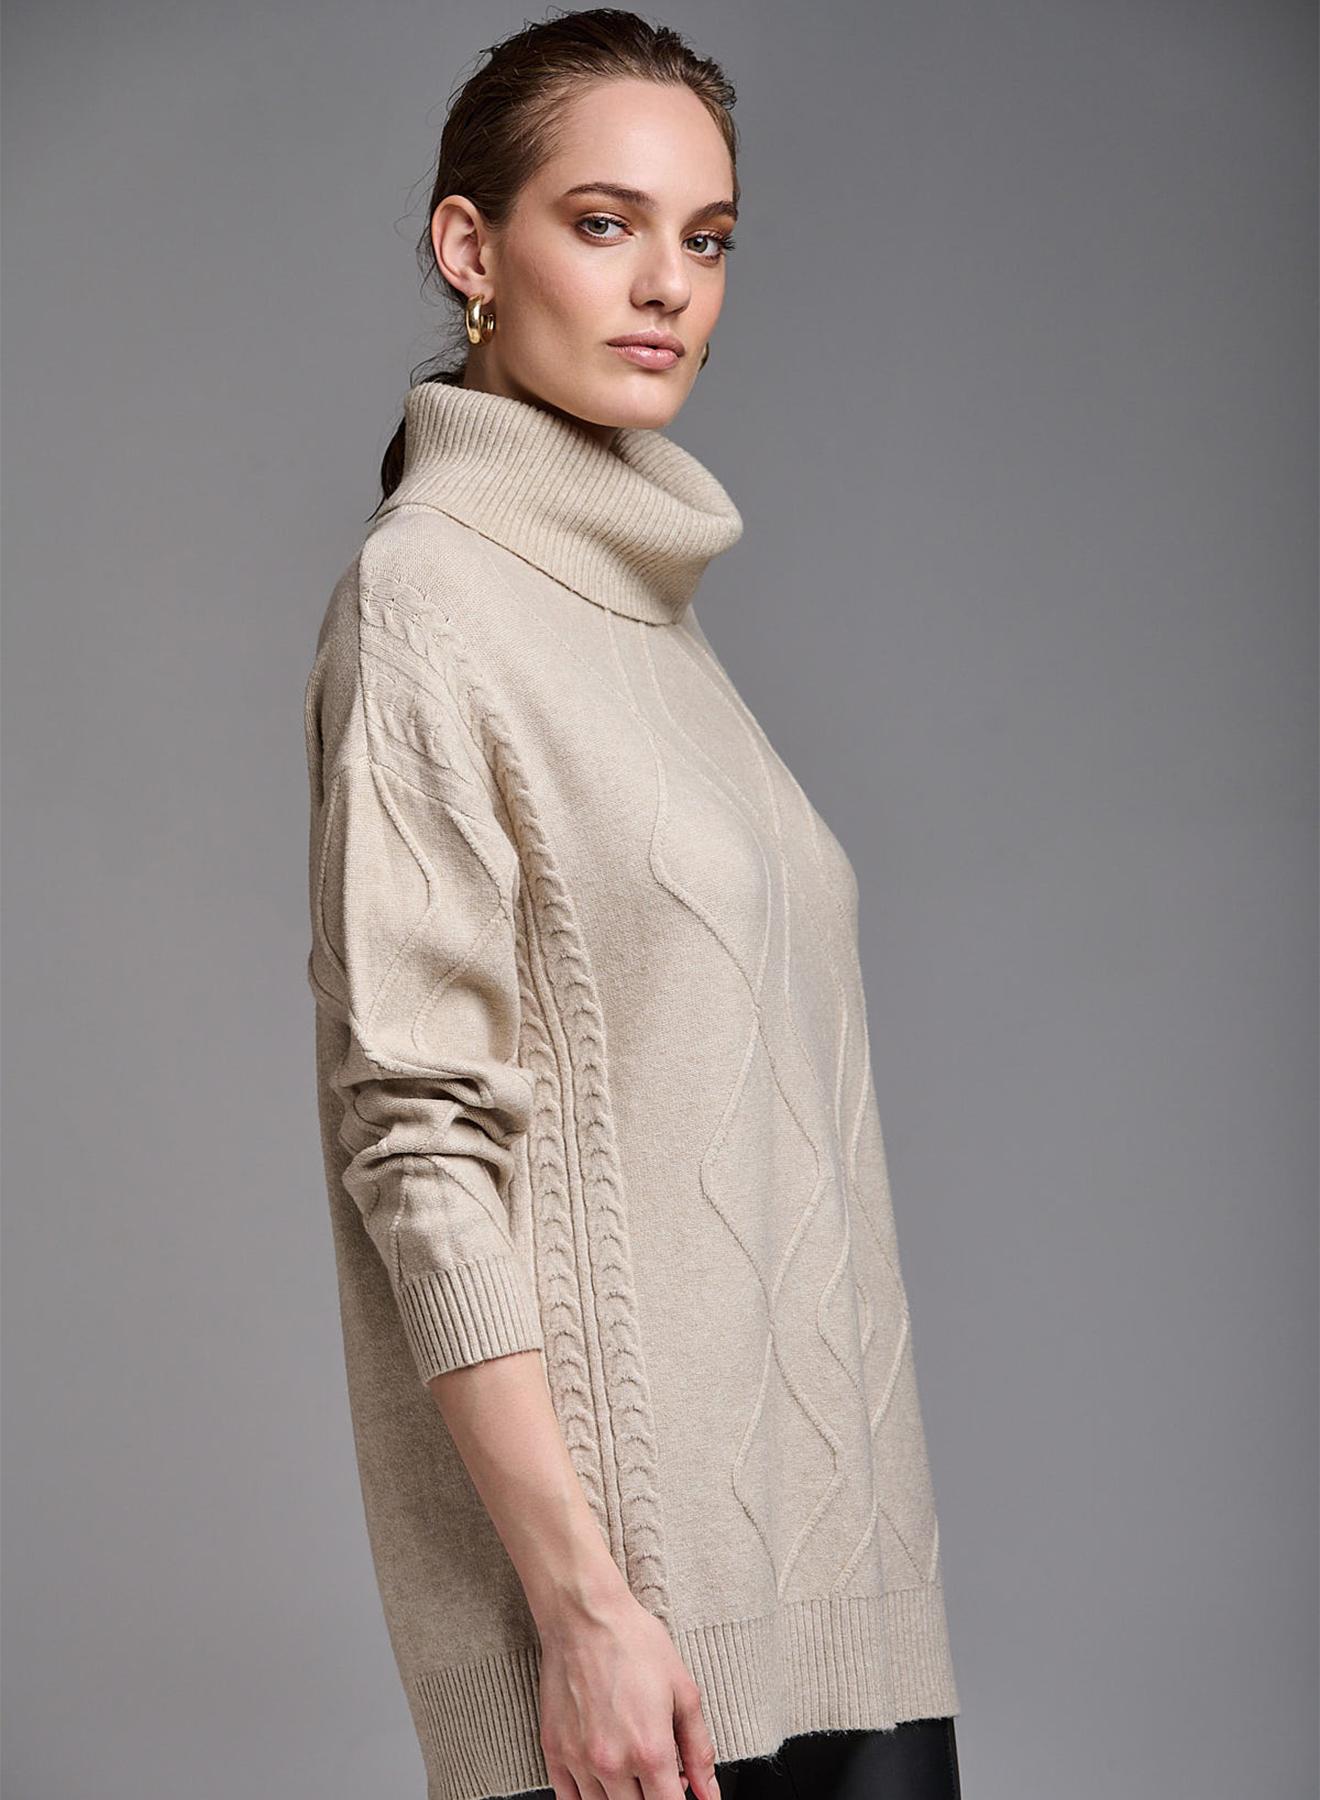 Turtleneck sweater with textured details - 4